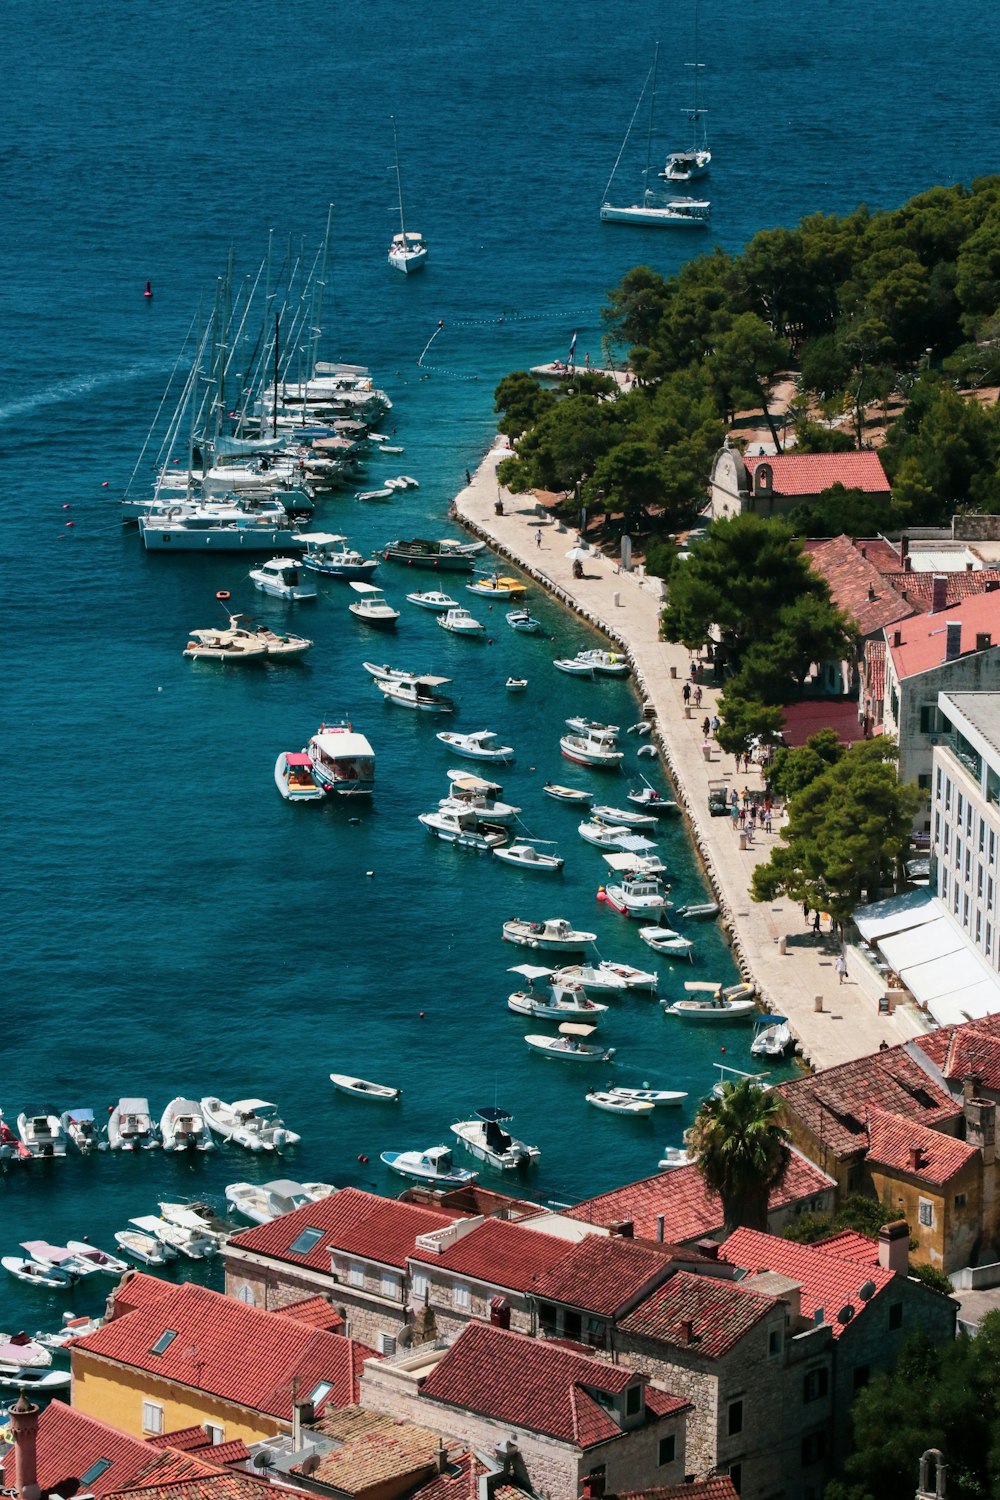 aerial view of boats on sea near city buildings during daytime